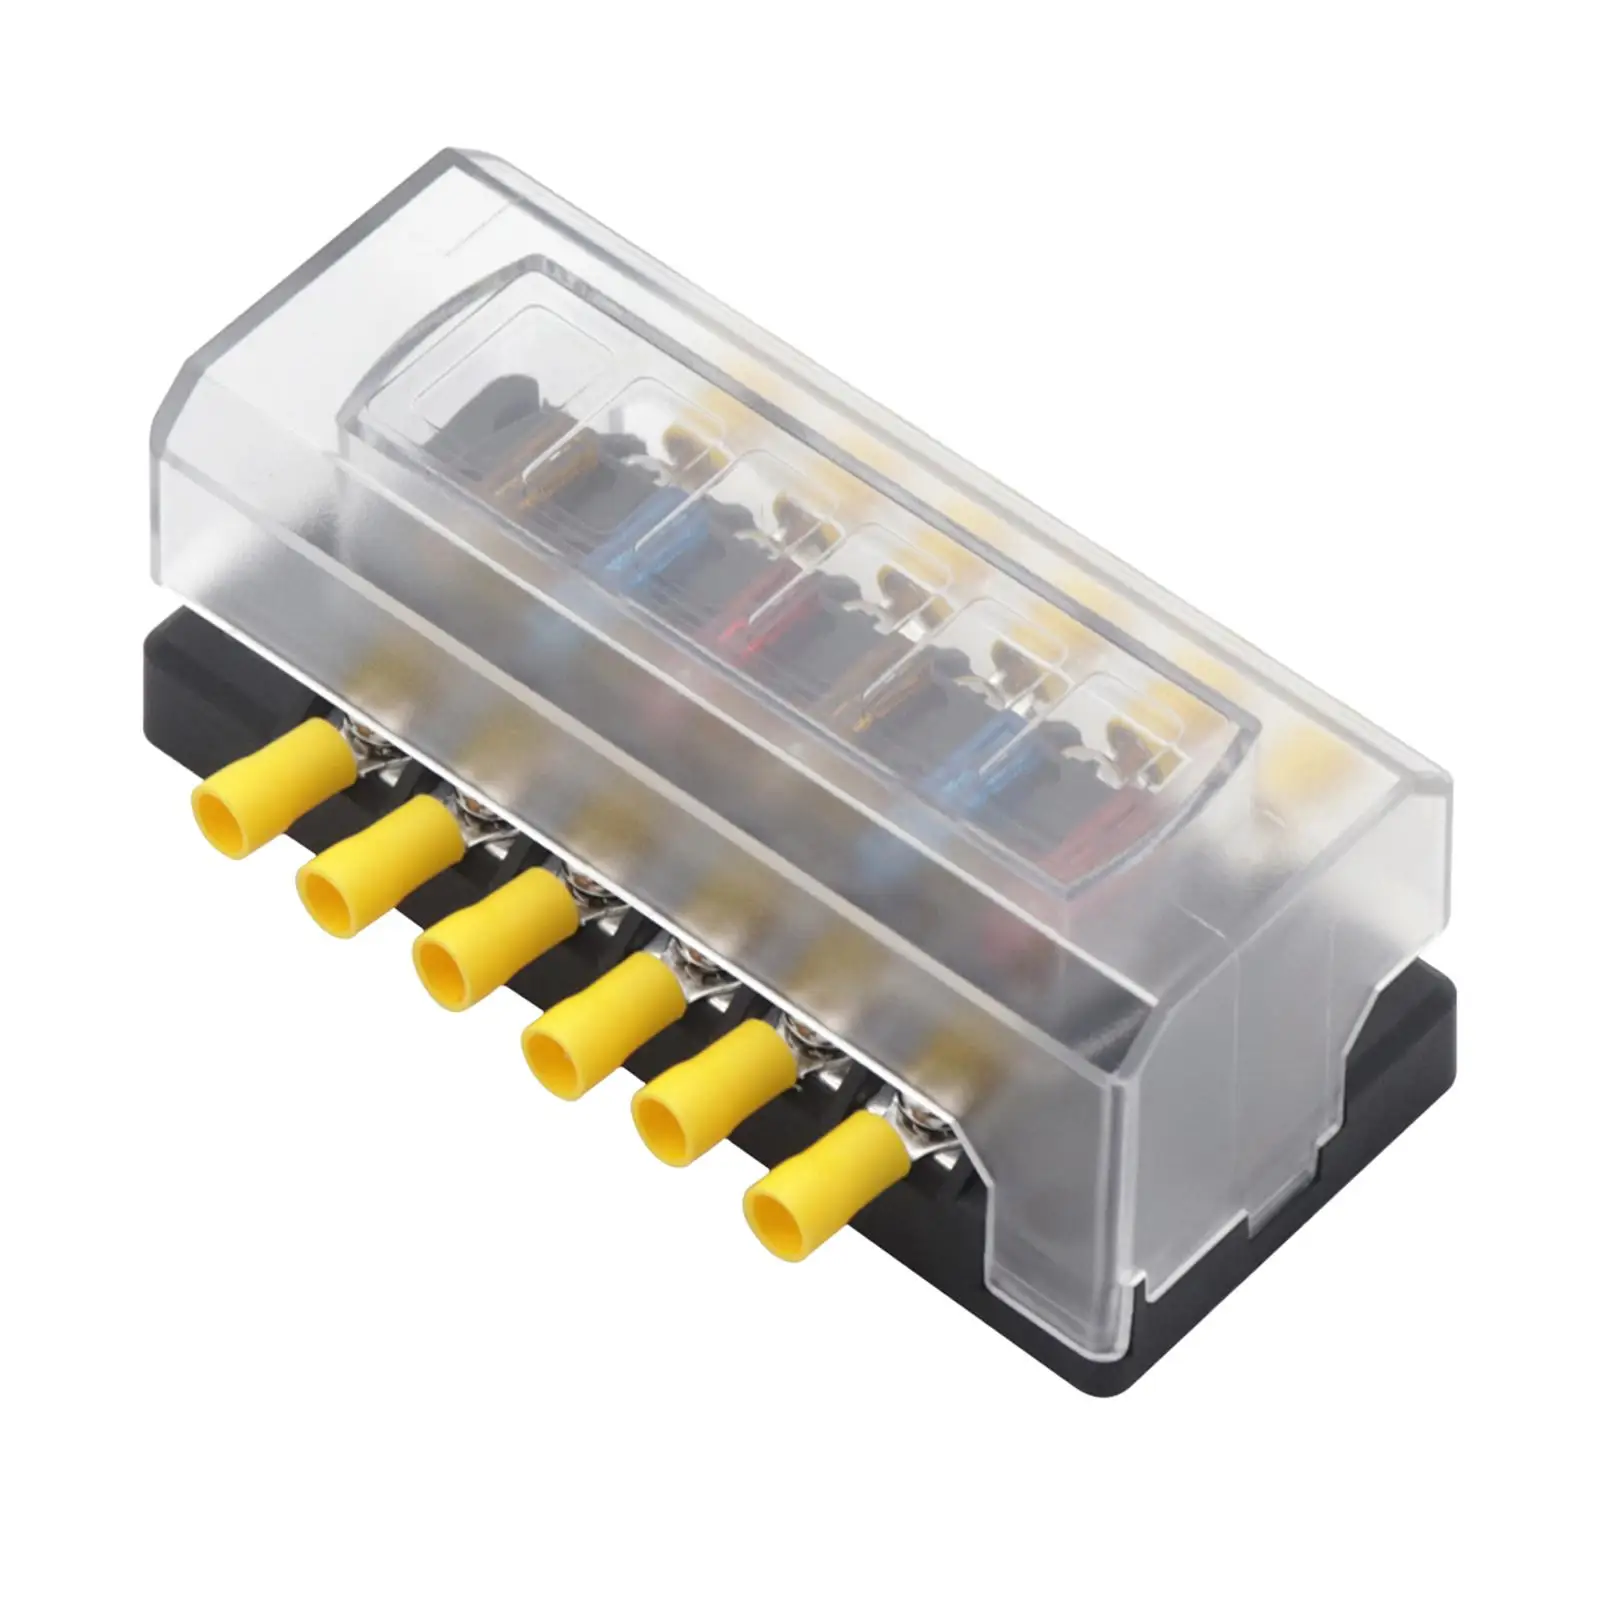 12 Way Fuse Box Holder Waterproof Cover 6 in 6 Out for Marine Yacht Bus